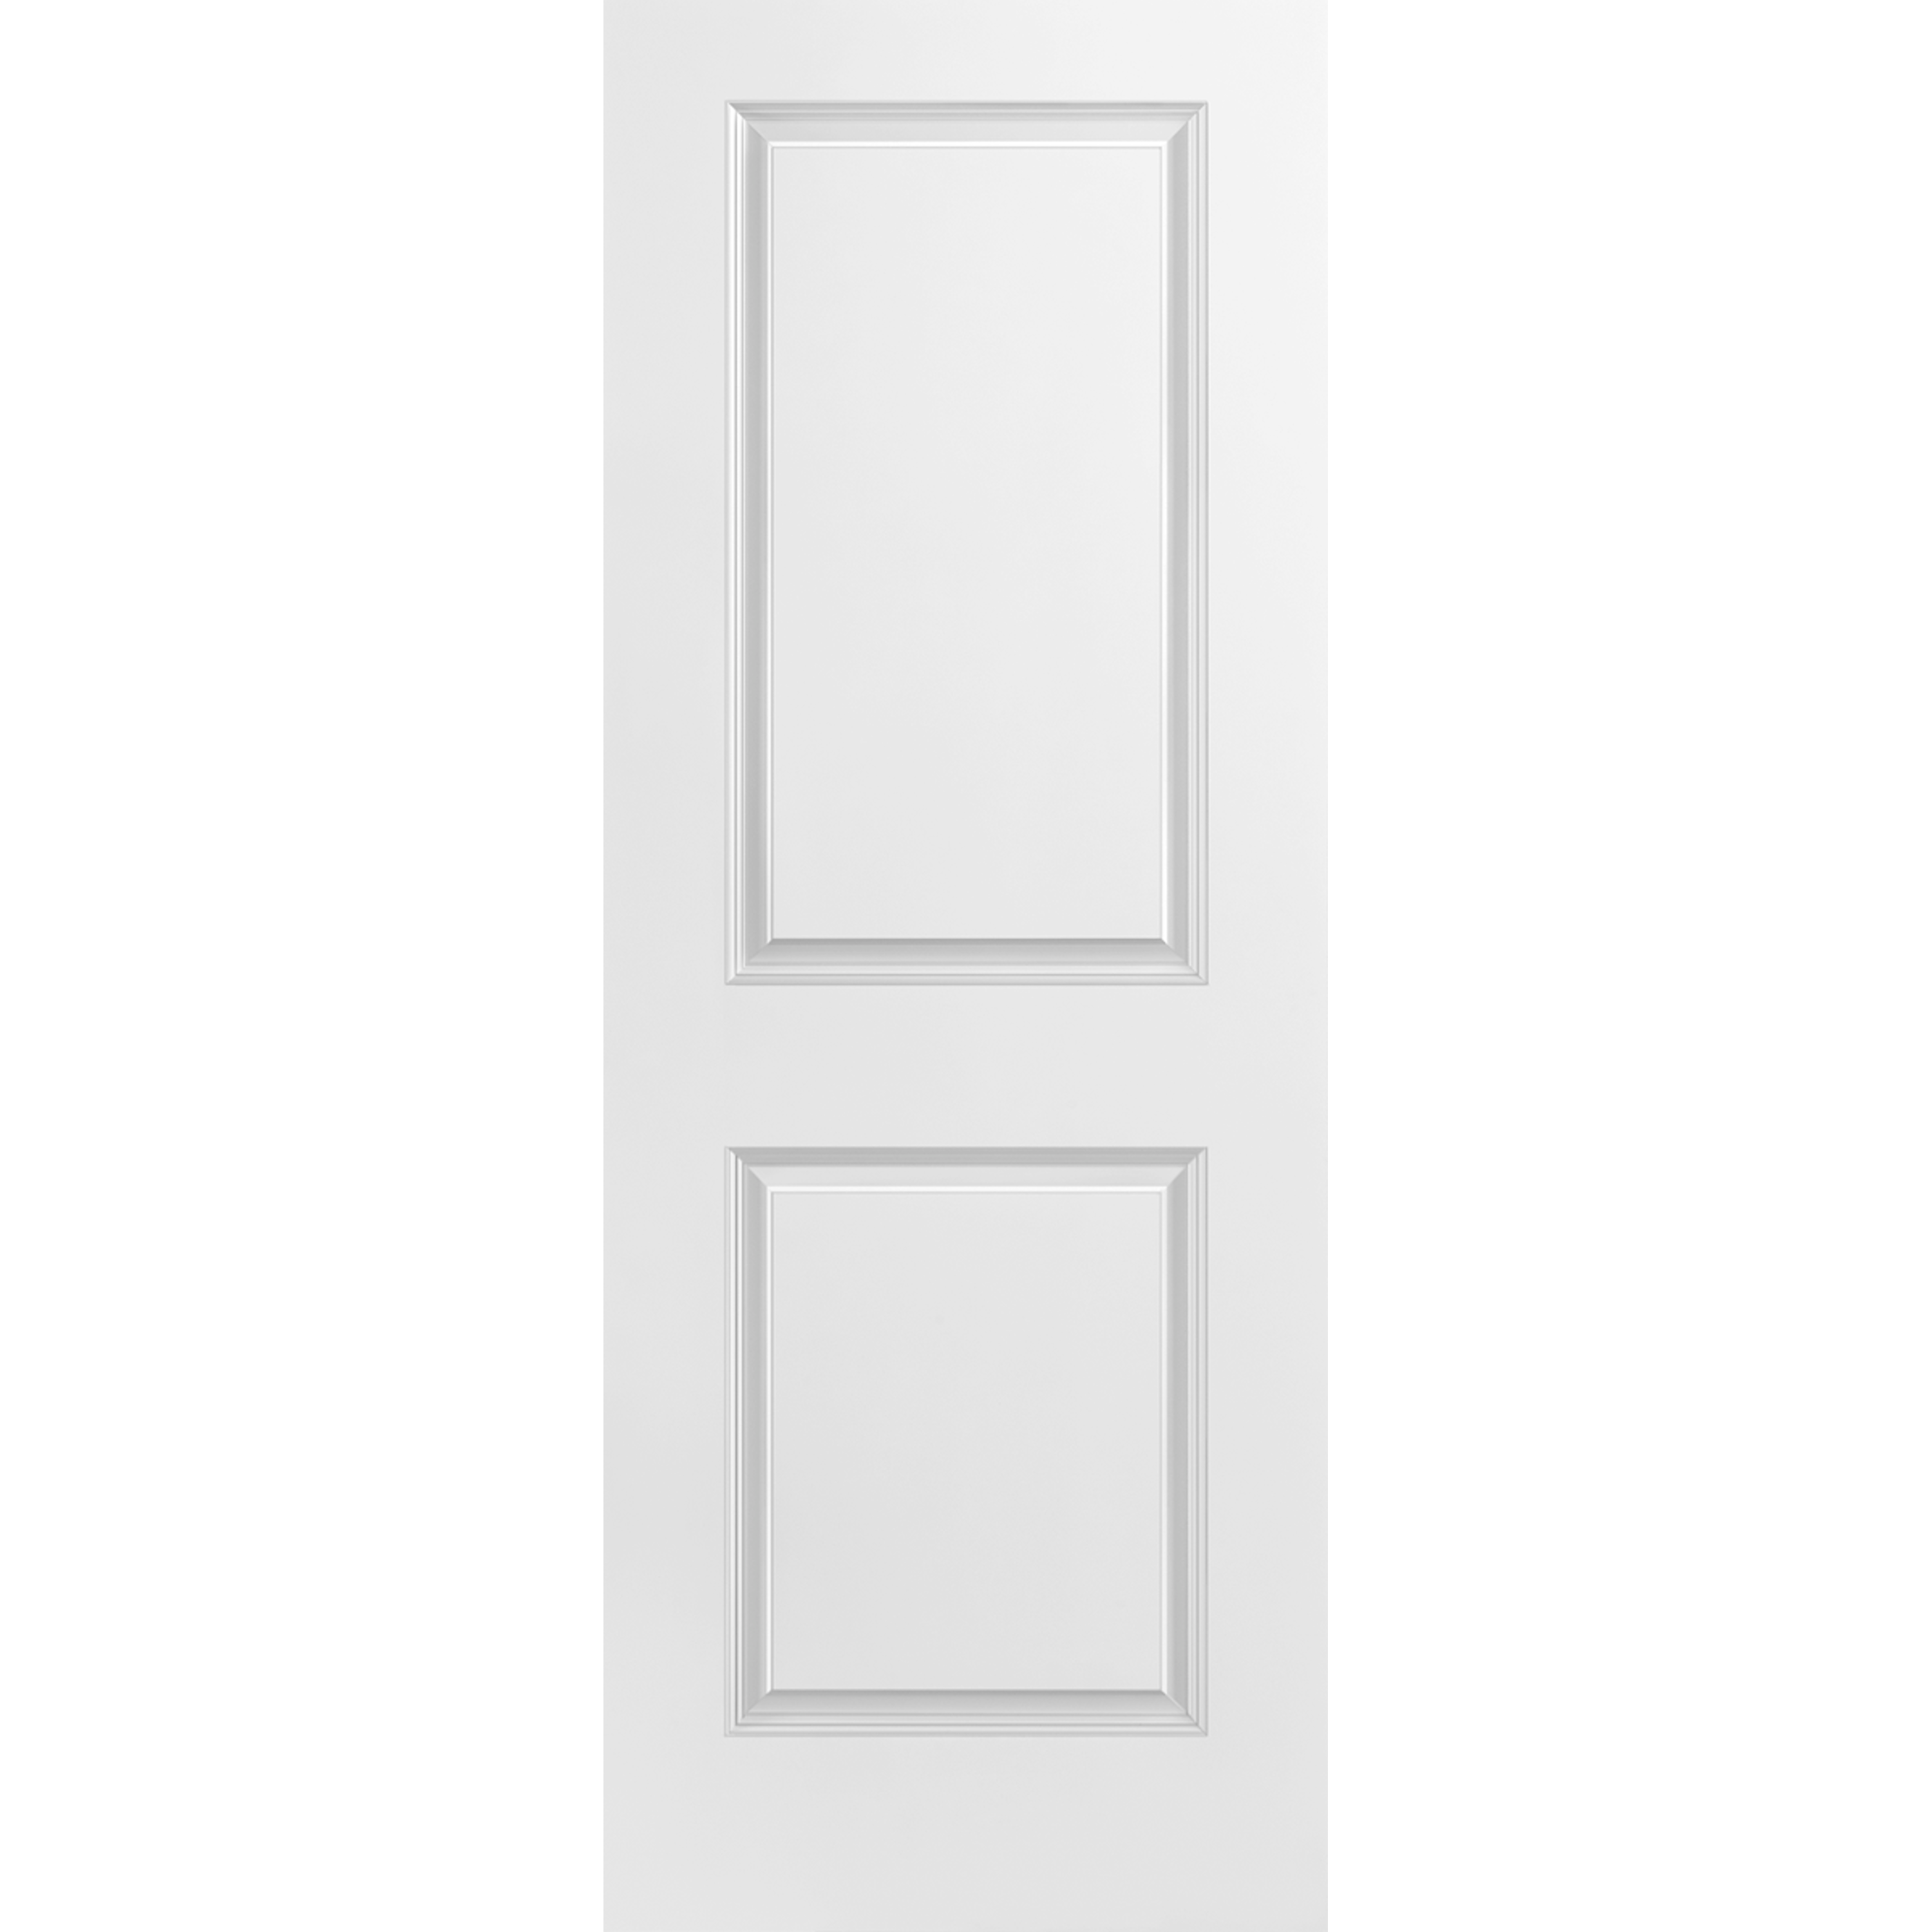 36x80 2 Panel Square Smooth Moulded Fast Fit Door with 4-5/8" PFJ Jamb